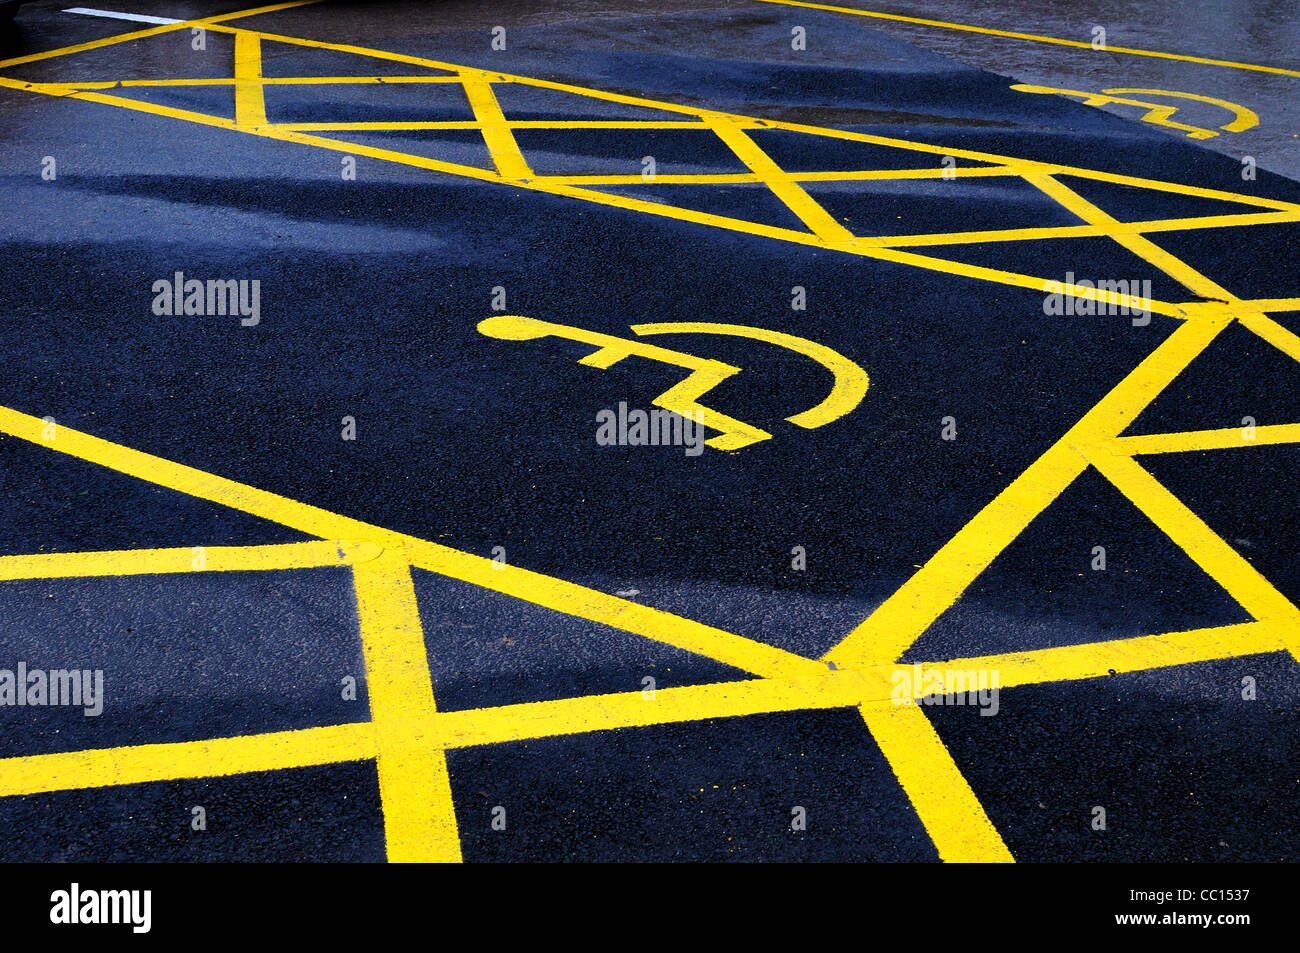 Disabled parking bay markings on roadway Stock Photo Alamy